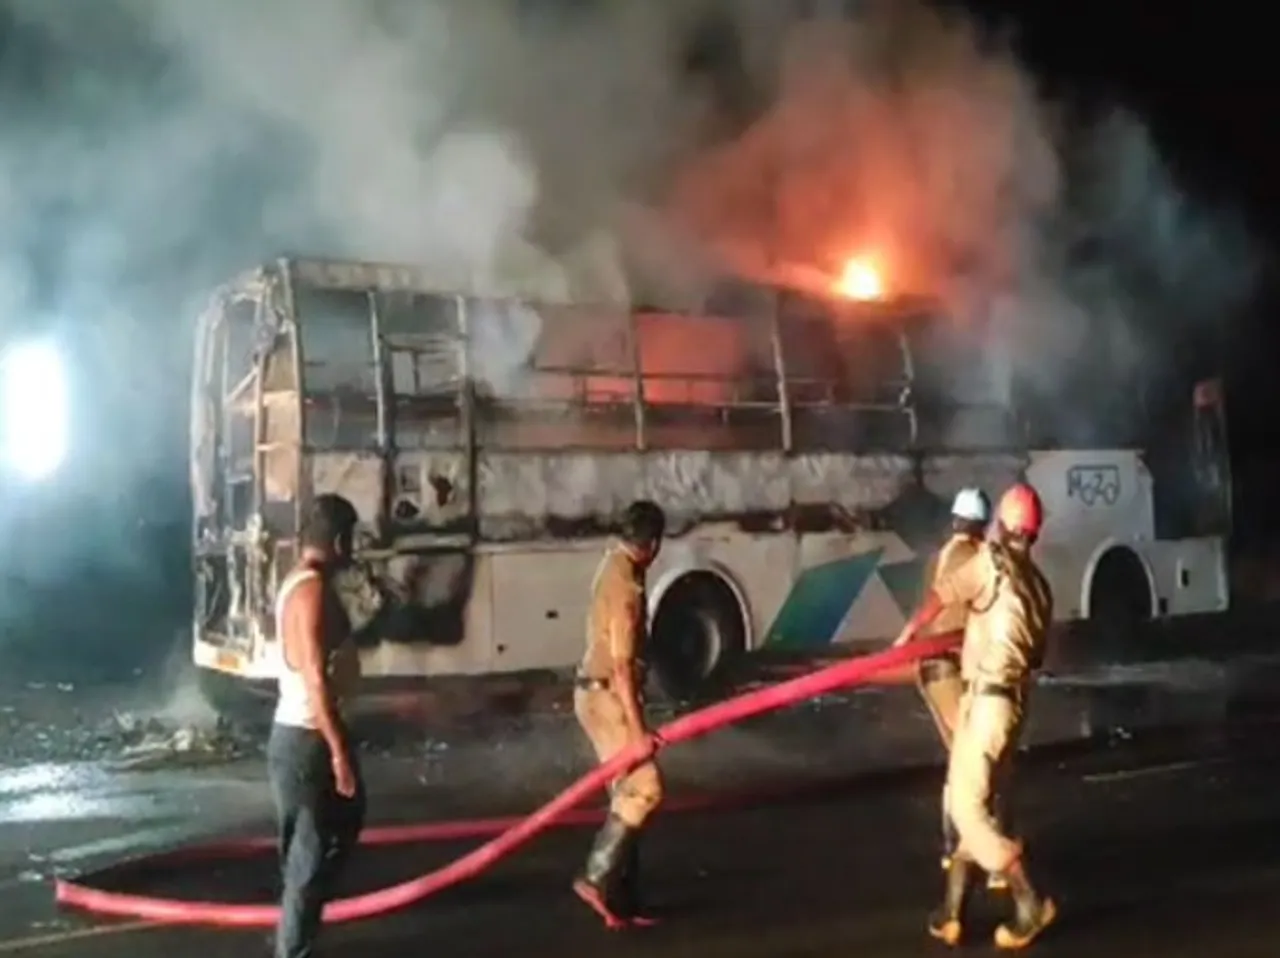 Fire on the bus! Passengers screaming for survival